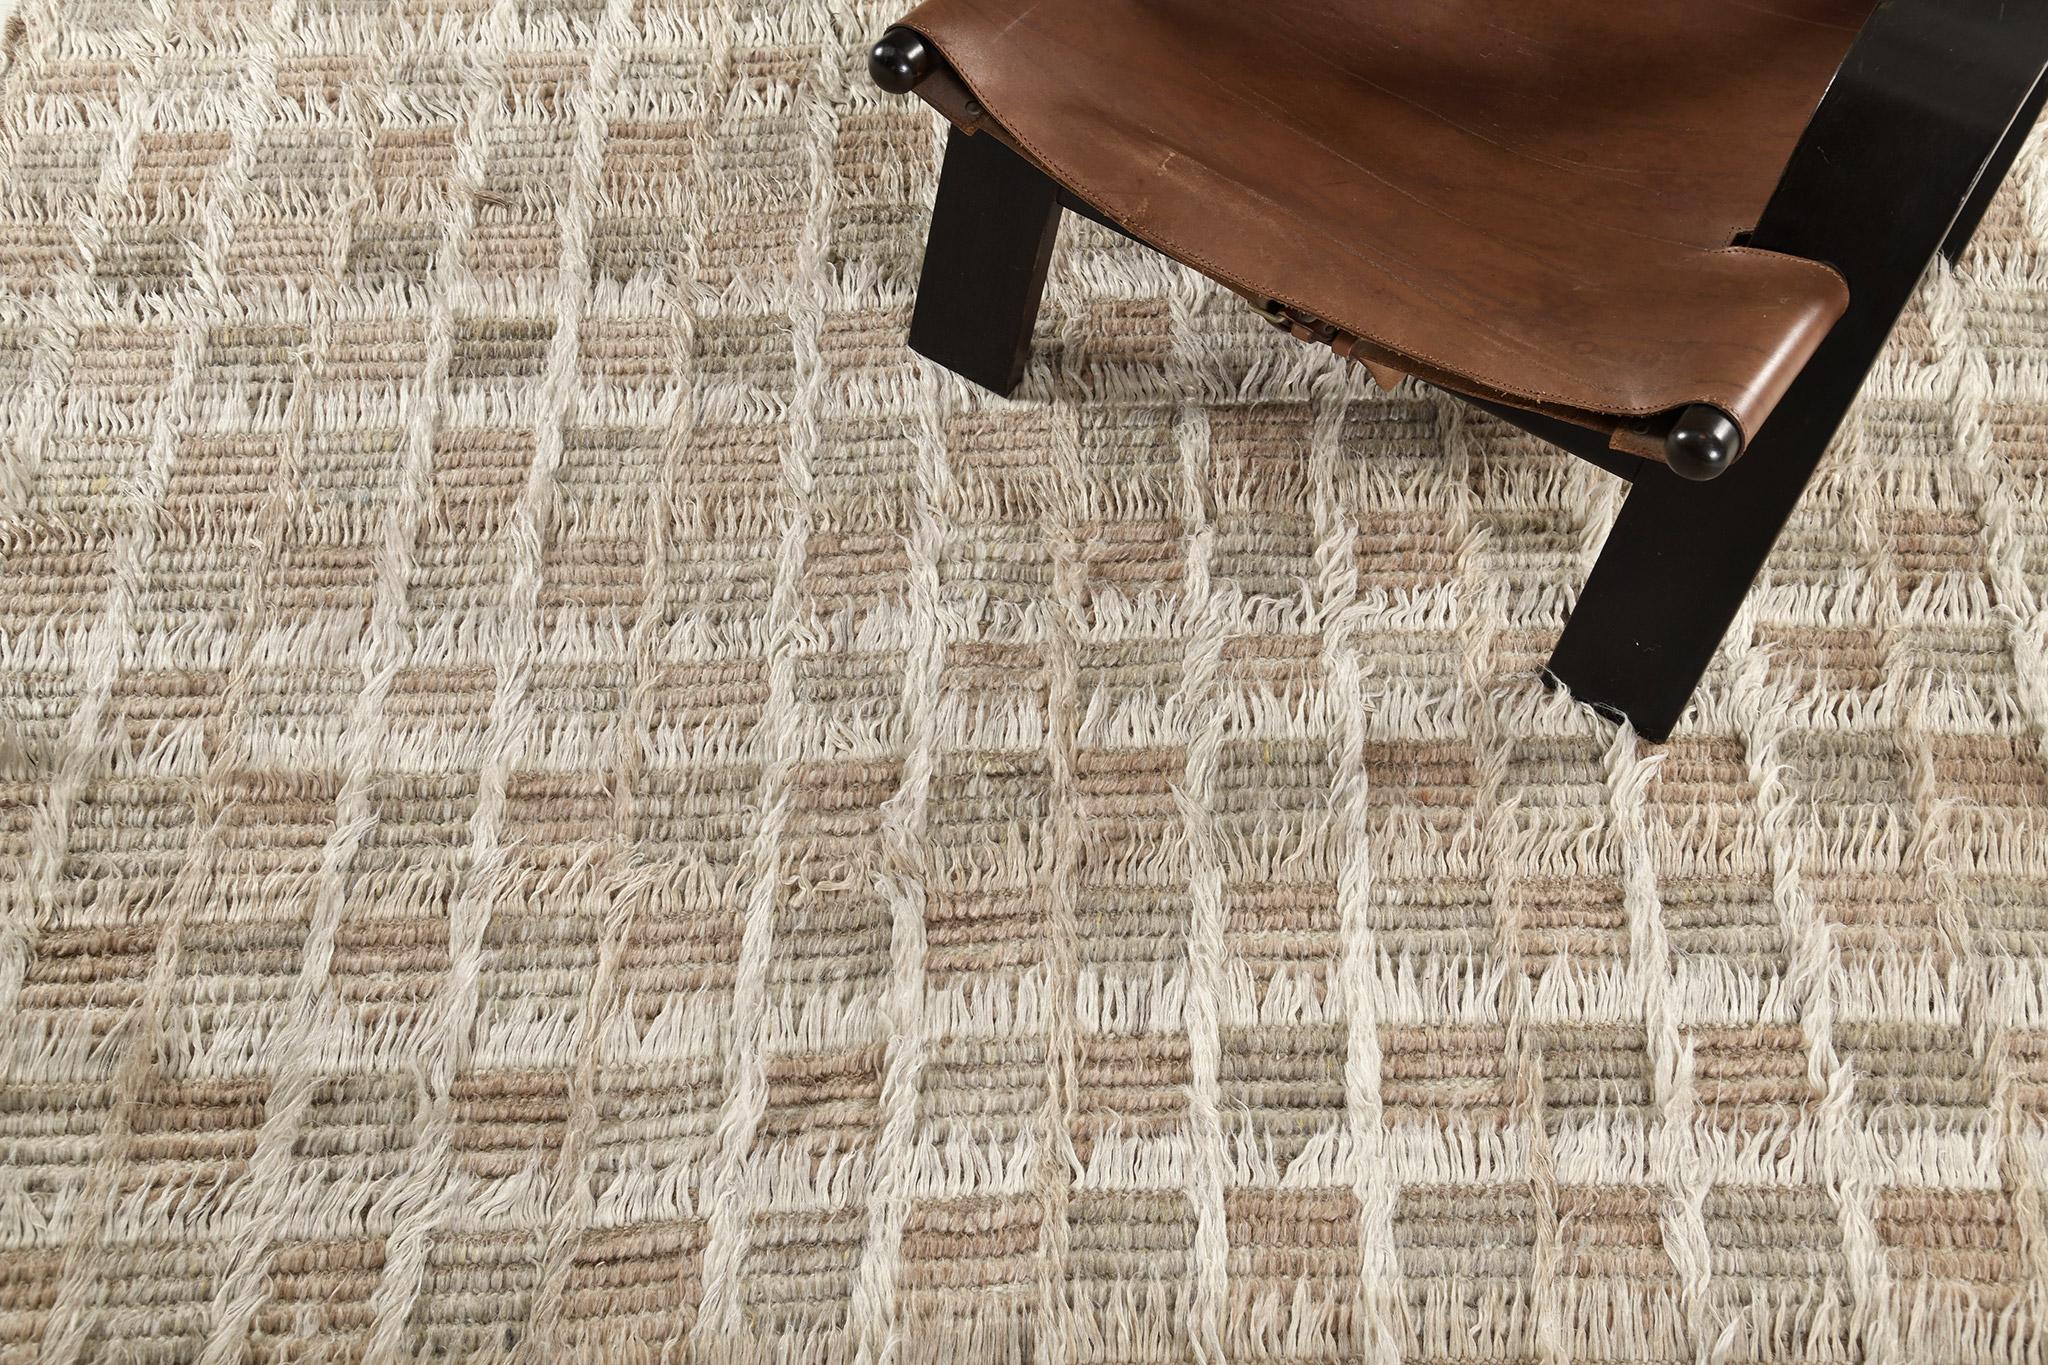 Miha highlights its cozy grid motifs that will surely captivate you into a sensational experience through its wonderfully textured rug. Featuring the mesmerizing shades of ivory, cinnamon and pale sage green, this exquisite rug is perfect for a wide